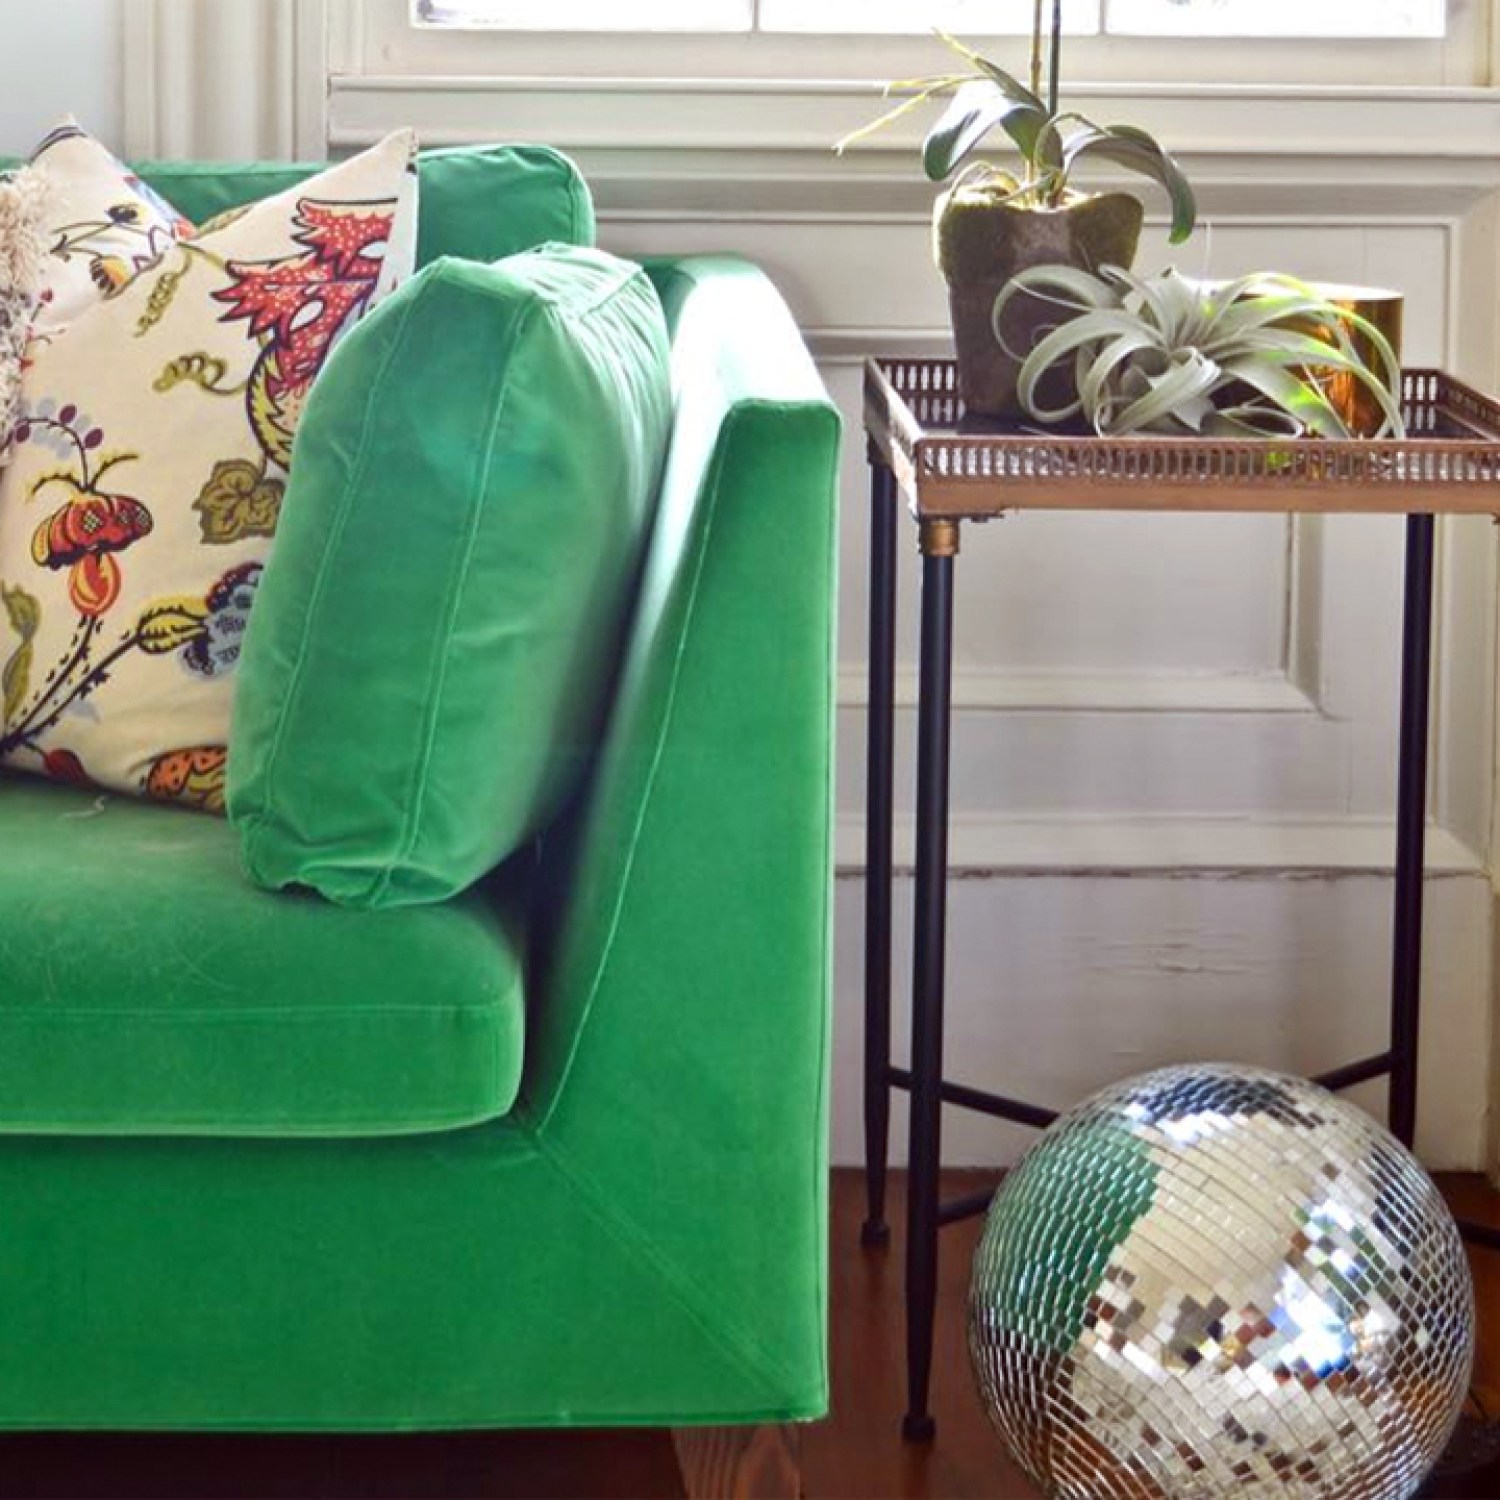 Green velvet couch in a home living room